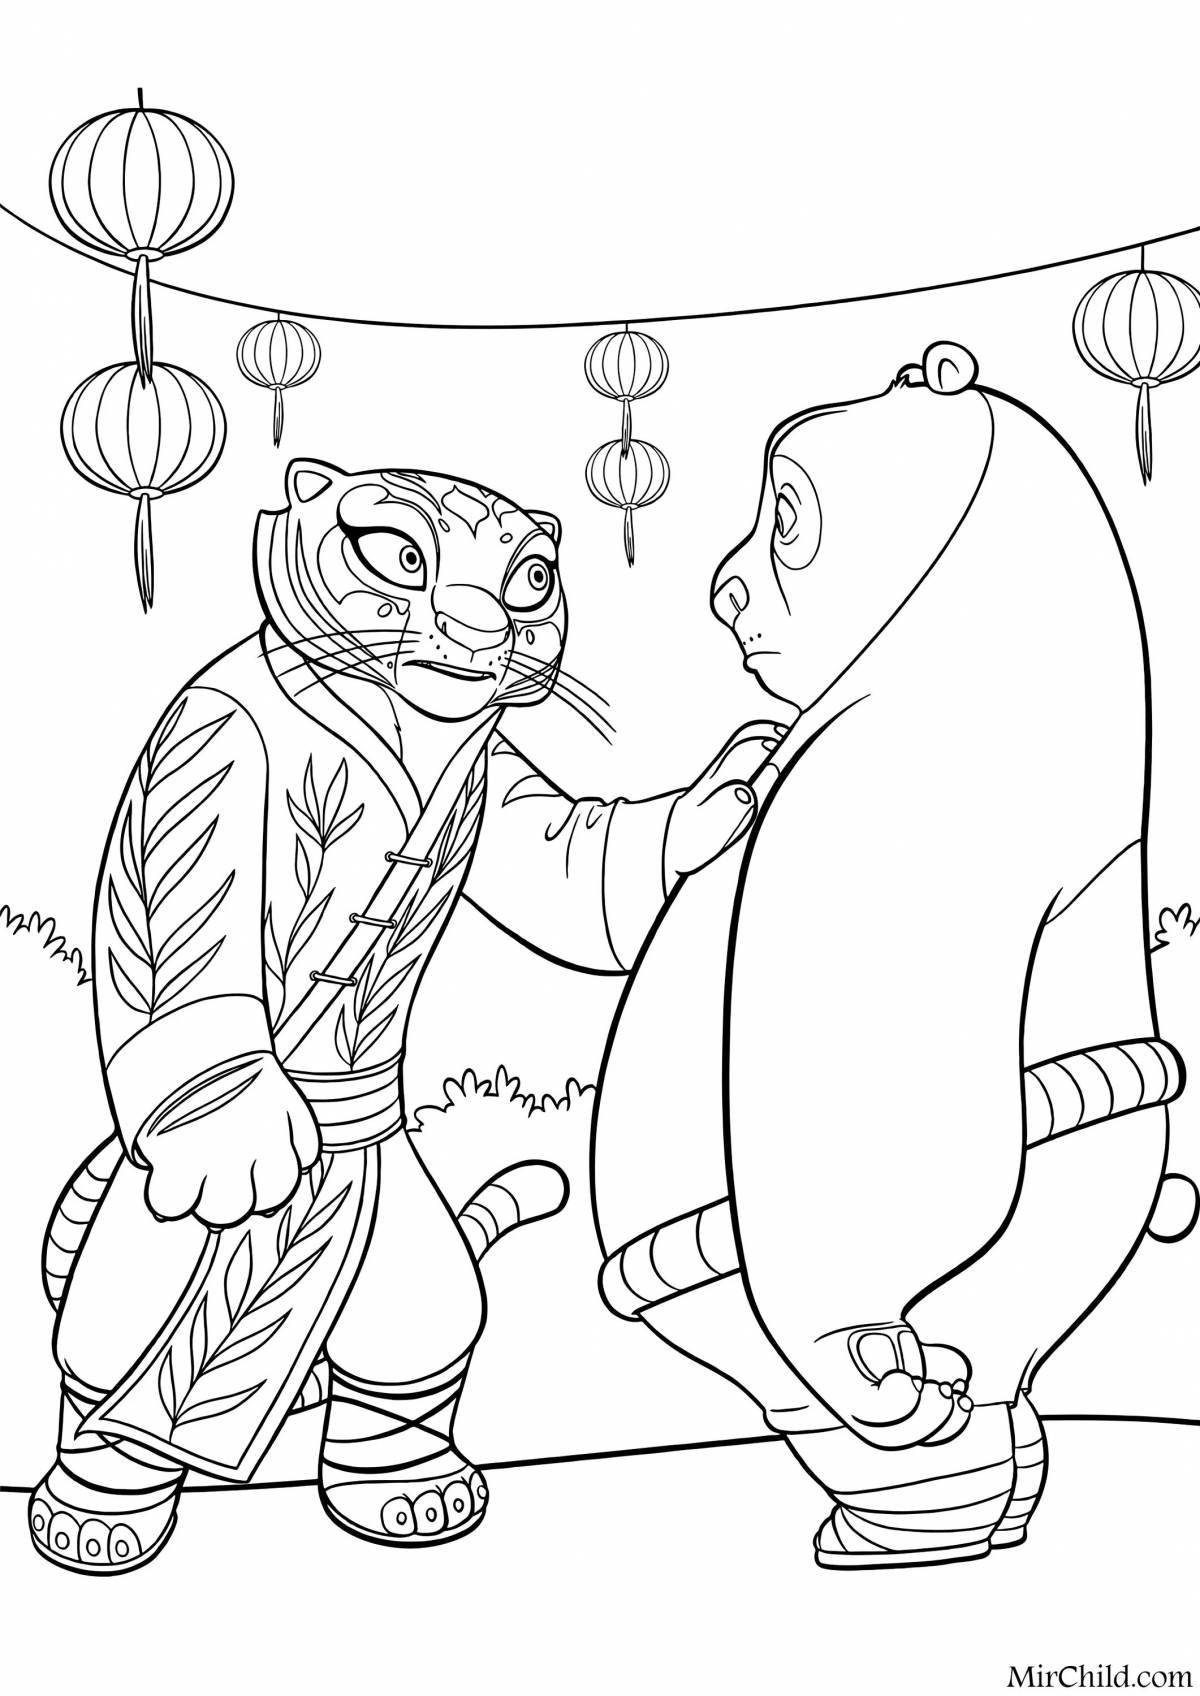 Courageous tigress coloring page